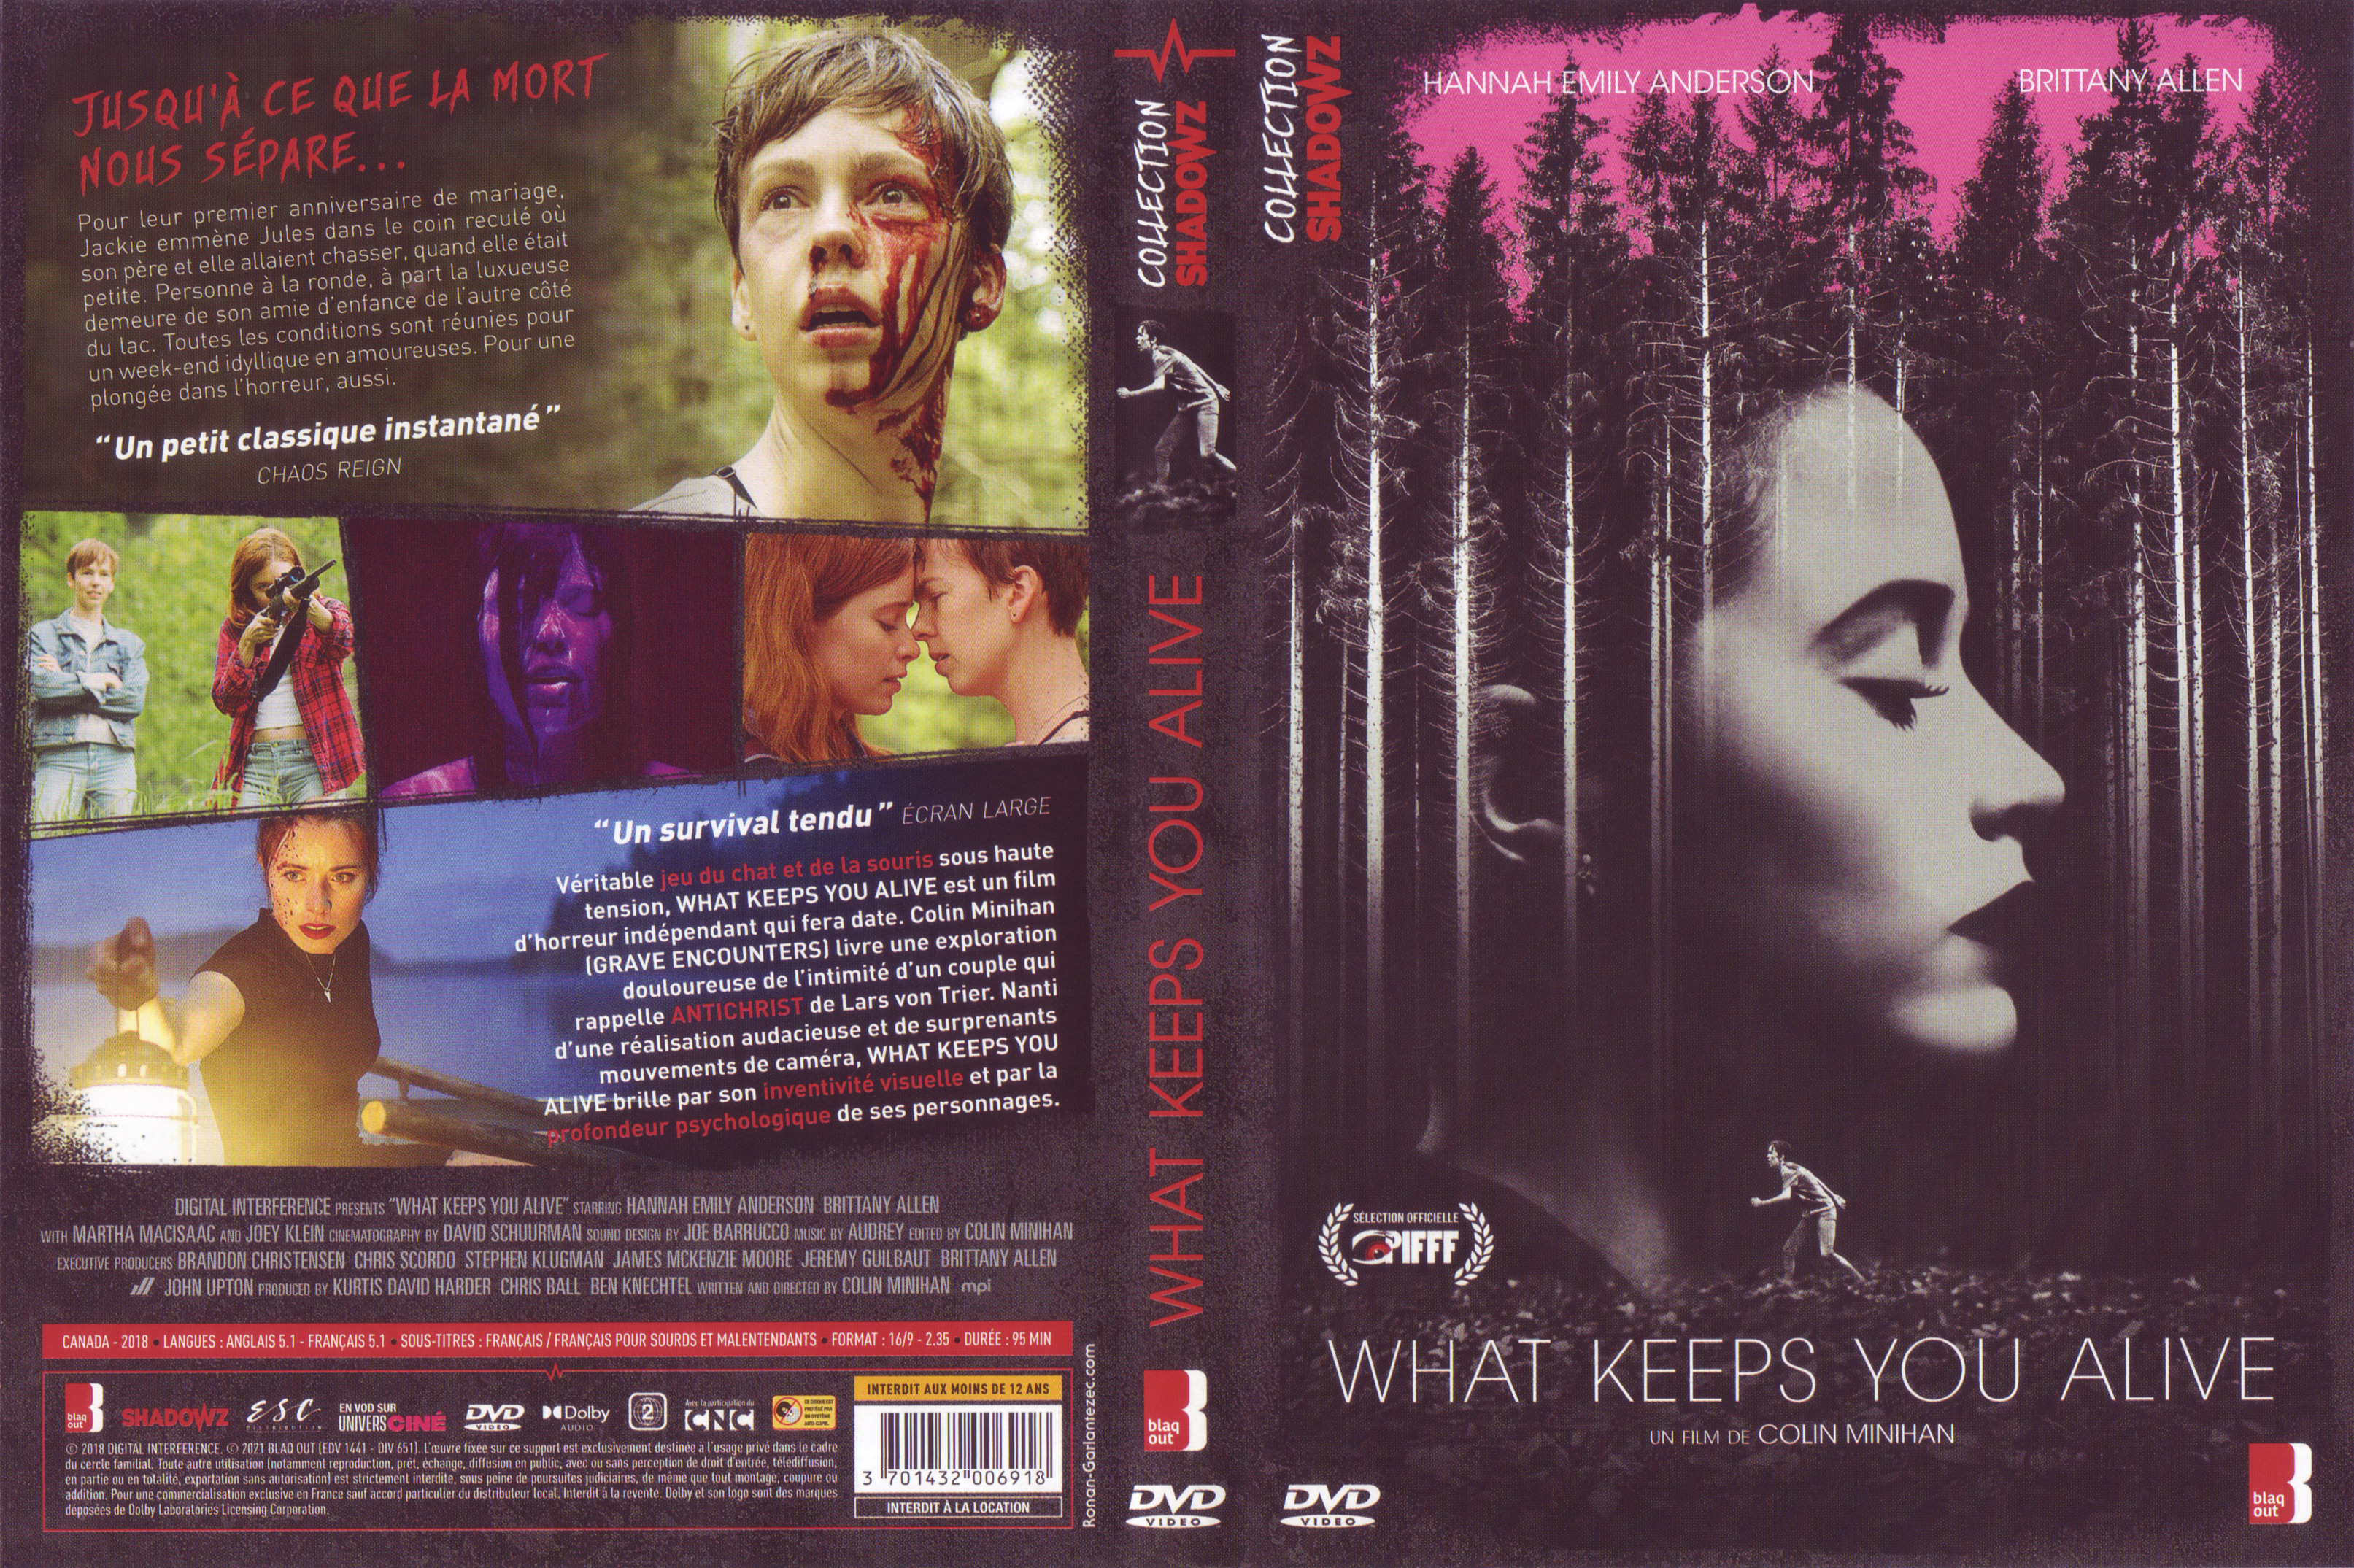 Jaquette DVD What keeps you alive